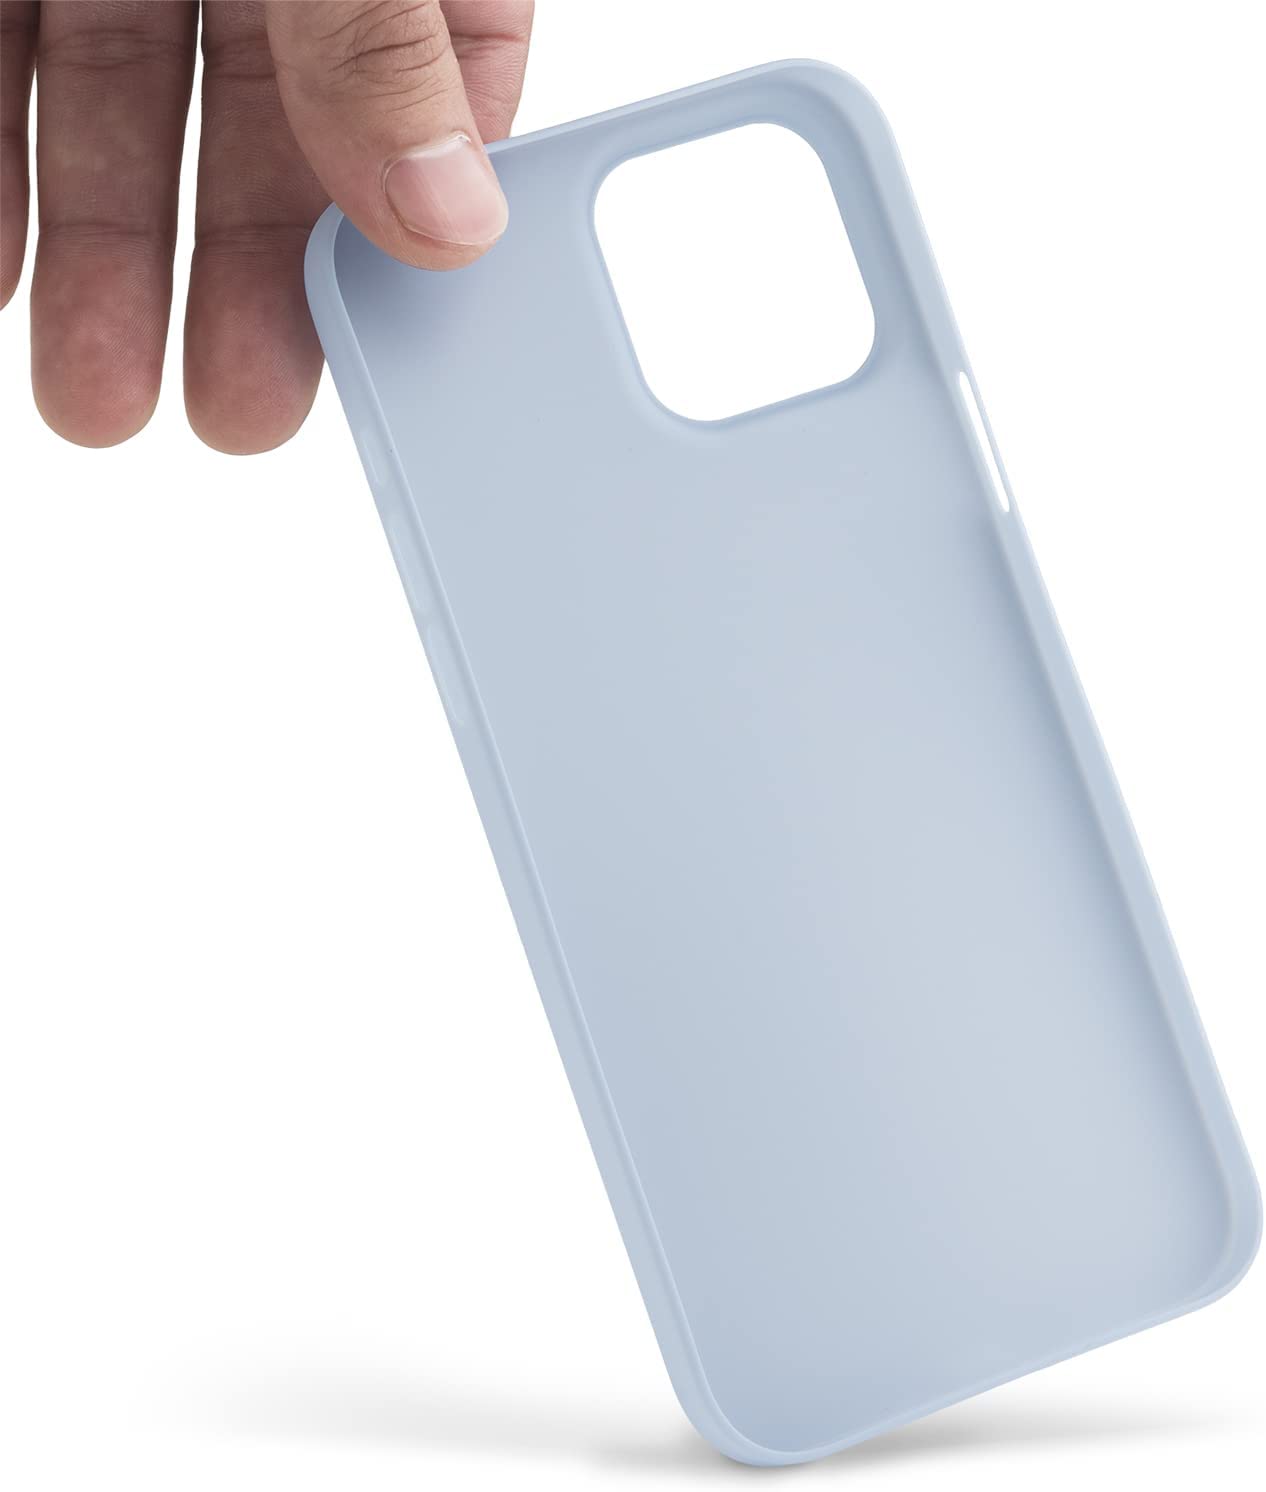 Totallee's marketing image displaying the inside of its Sierra Blue smartphone case for iPhone 13 Pro and iPhone 13 Pro Max